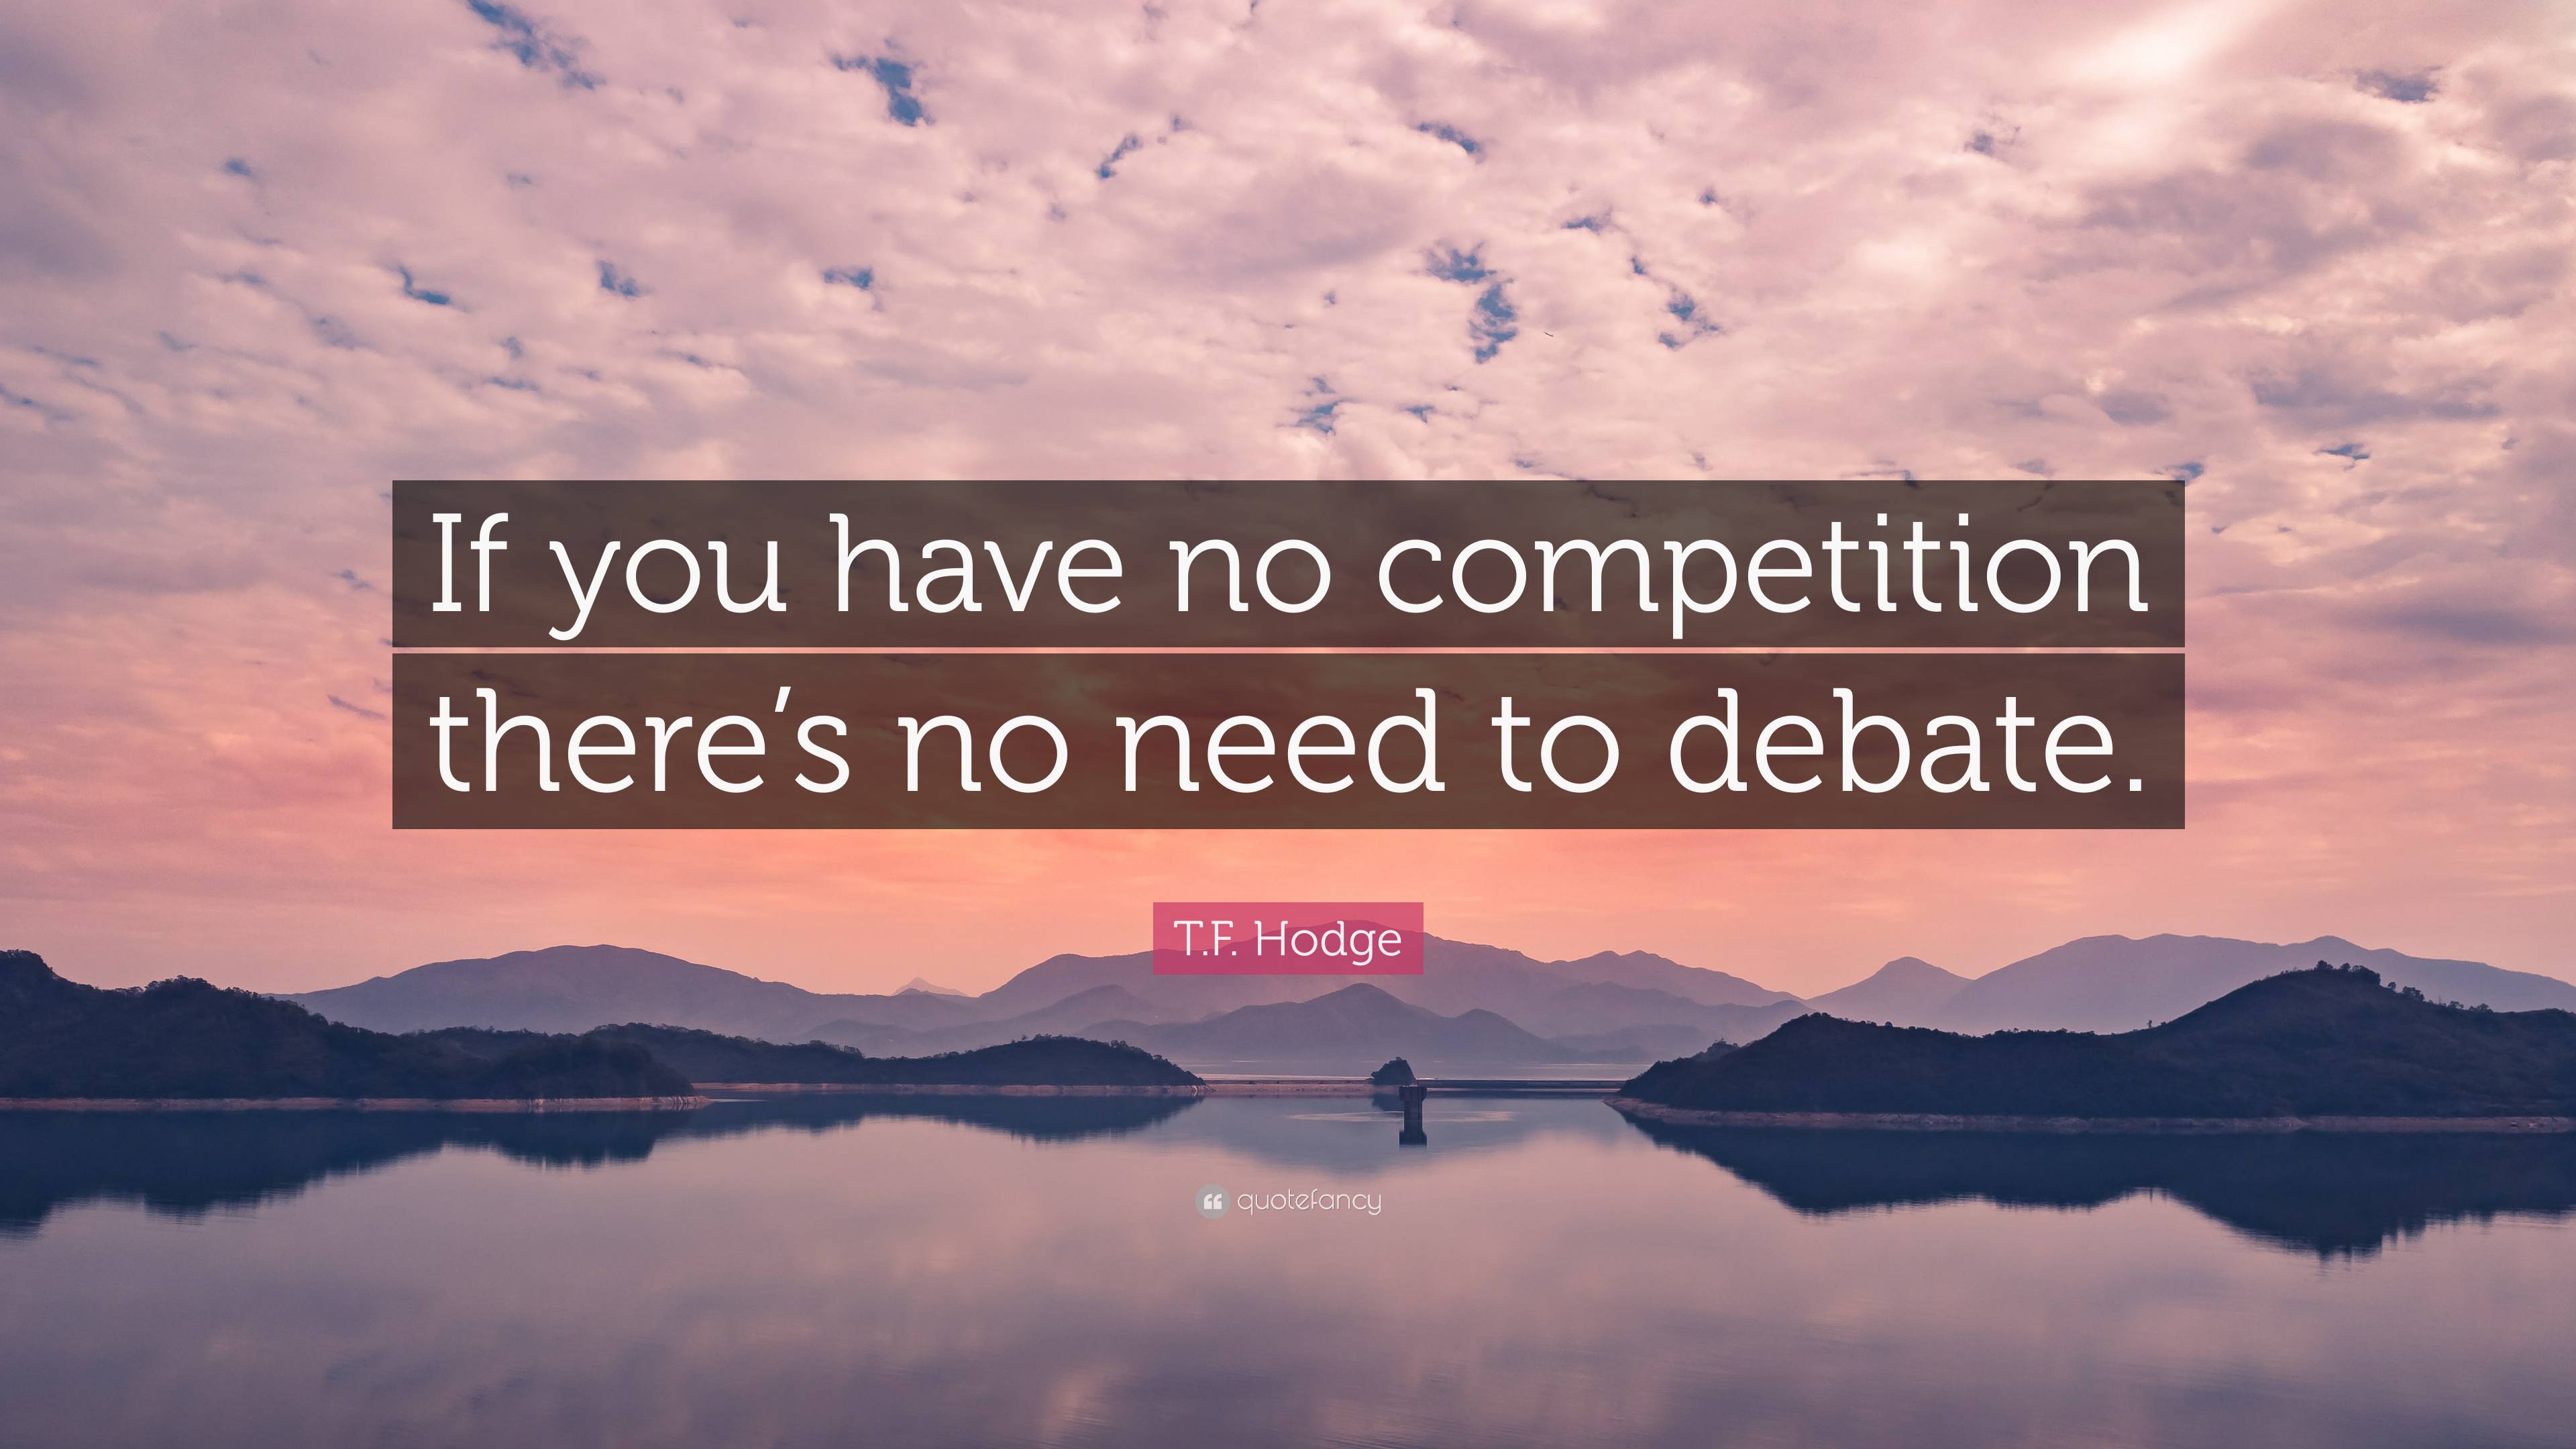 Detail Debate Competition Quotes Nomer 6